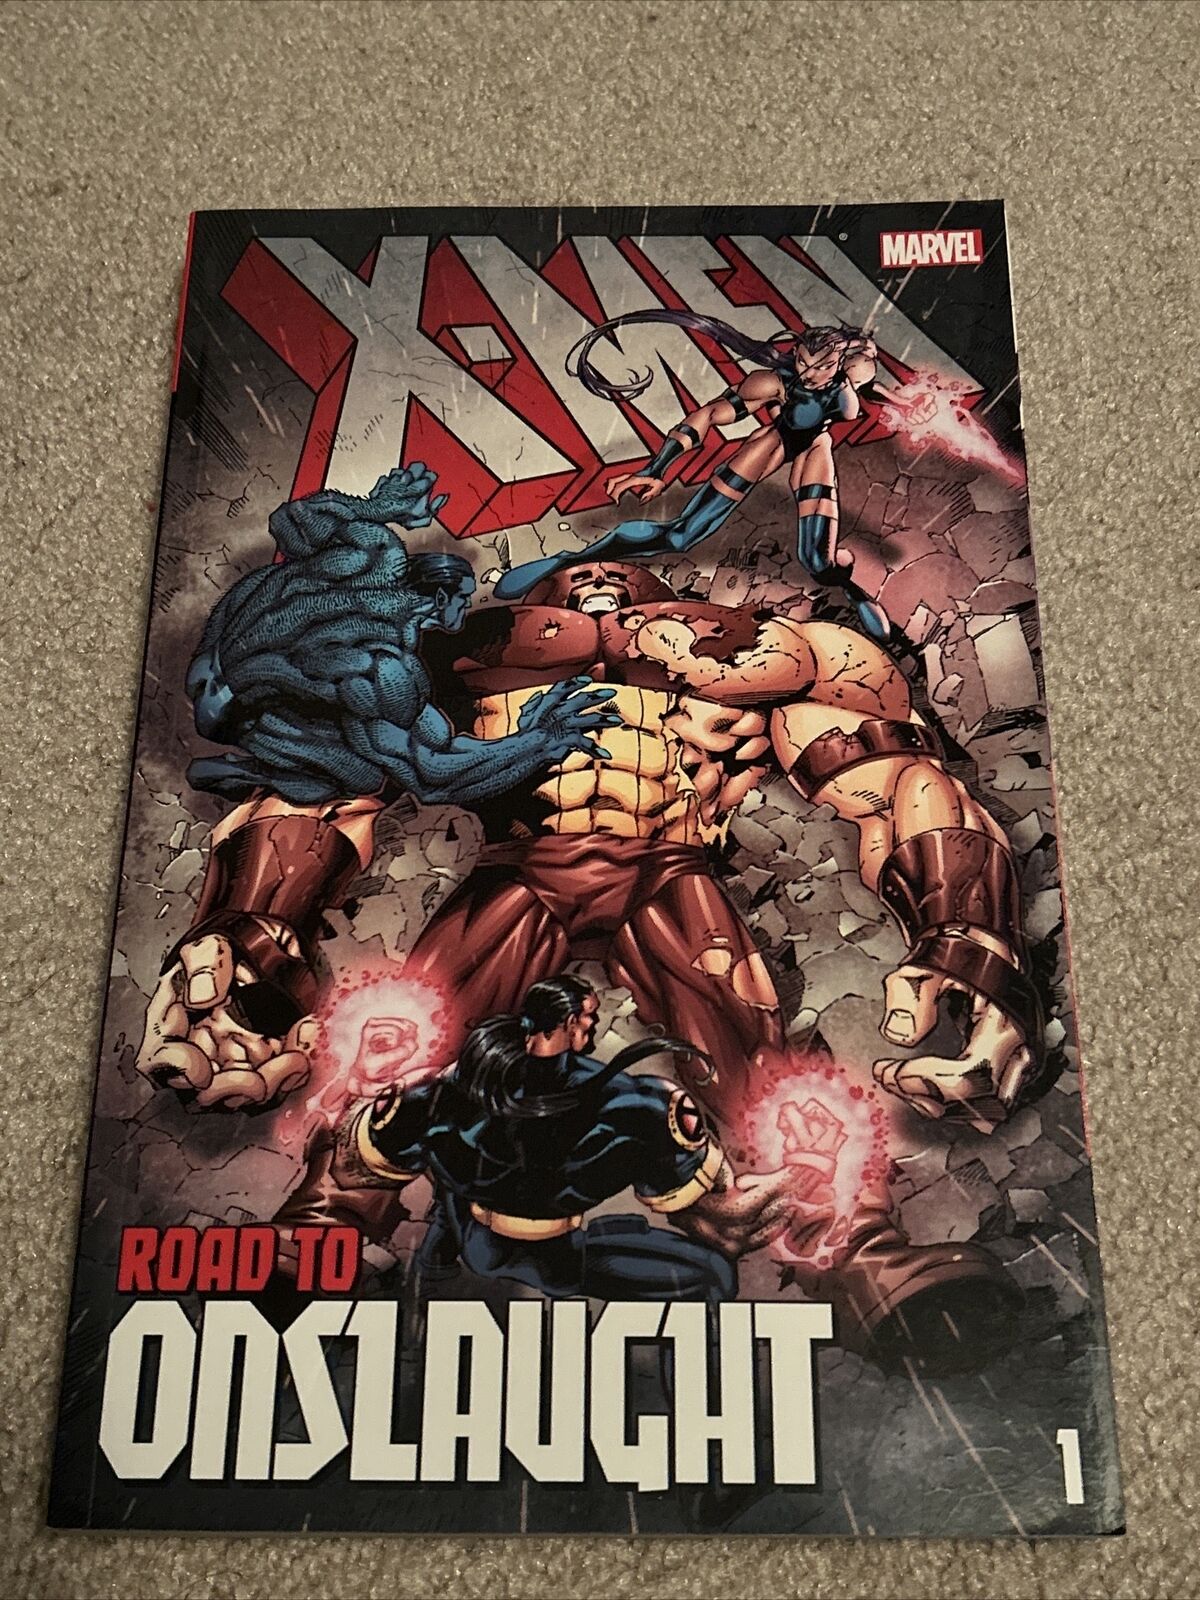 X-Men: The Road to Onslaught #1 (Marvel, 2014)